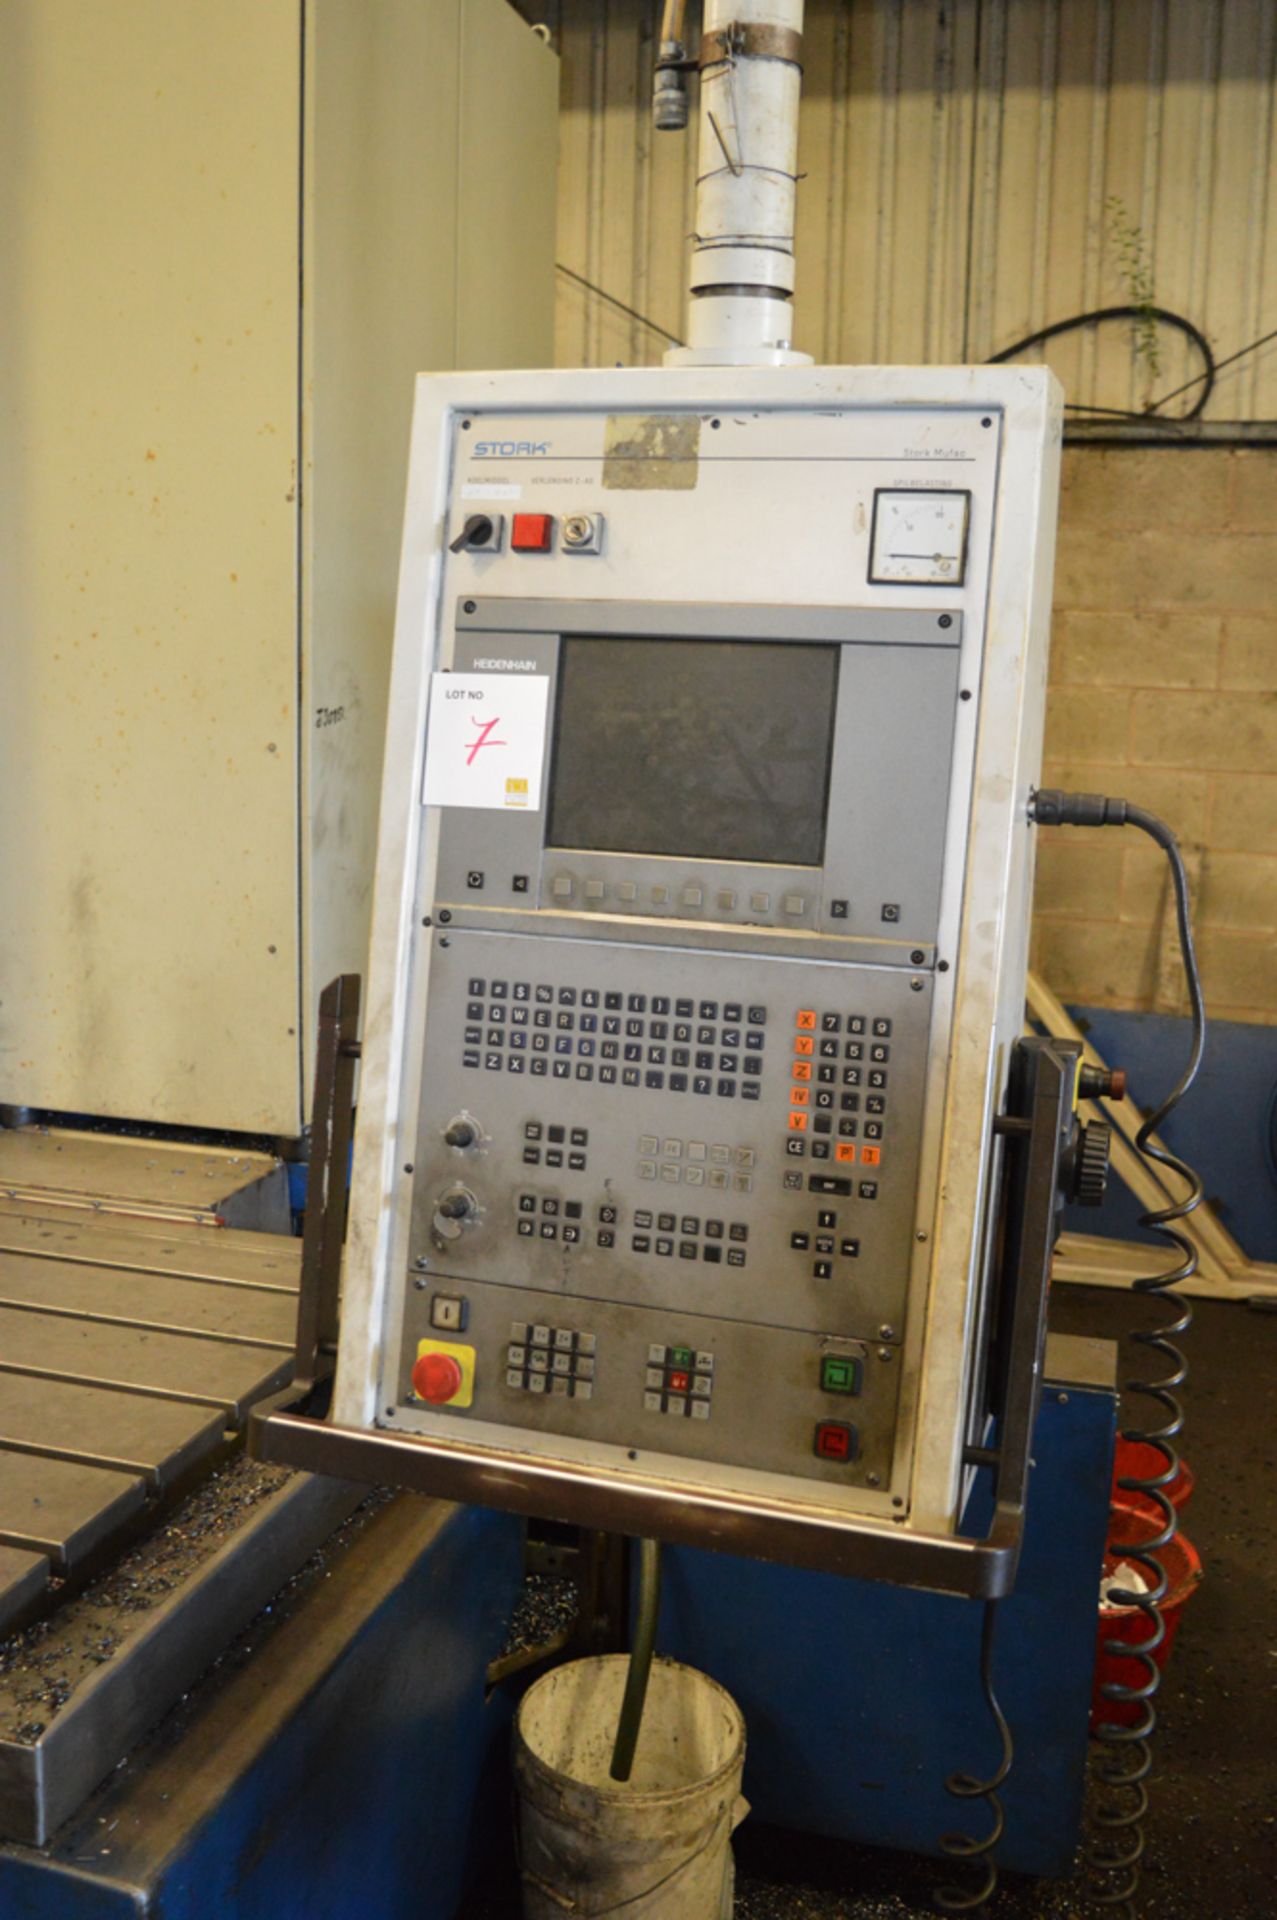 Butler Elgamill3-axis CNC bed type milling machine Year: 1987 S/N: 28180 c/w Heidenhain controls, - Image 2 of 6